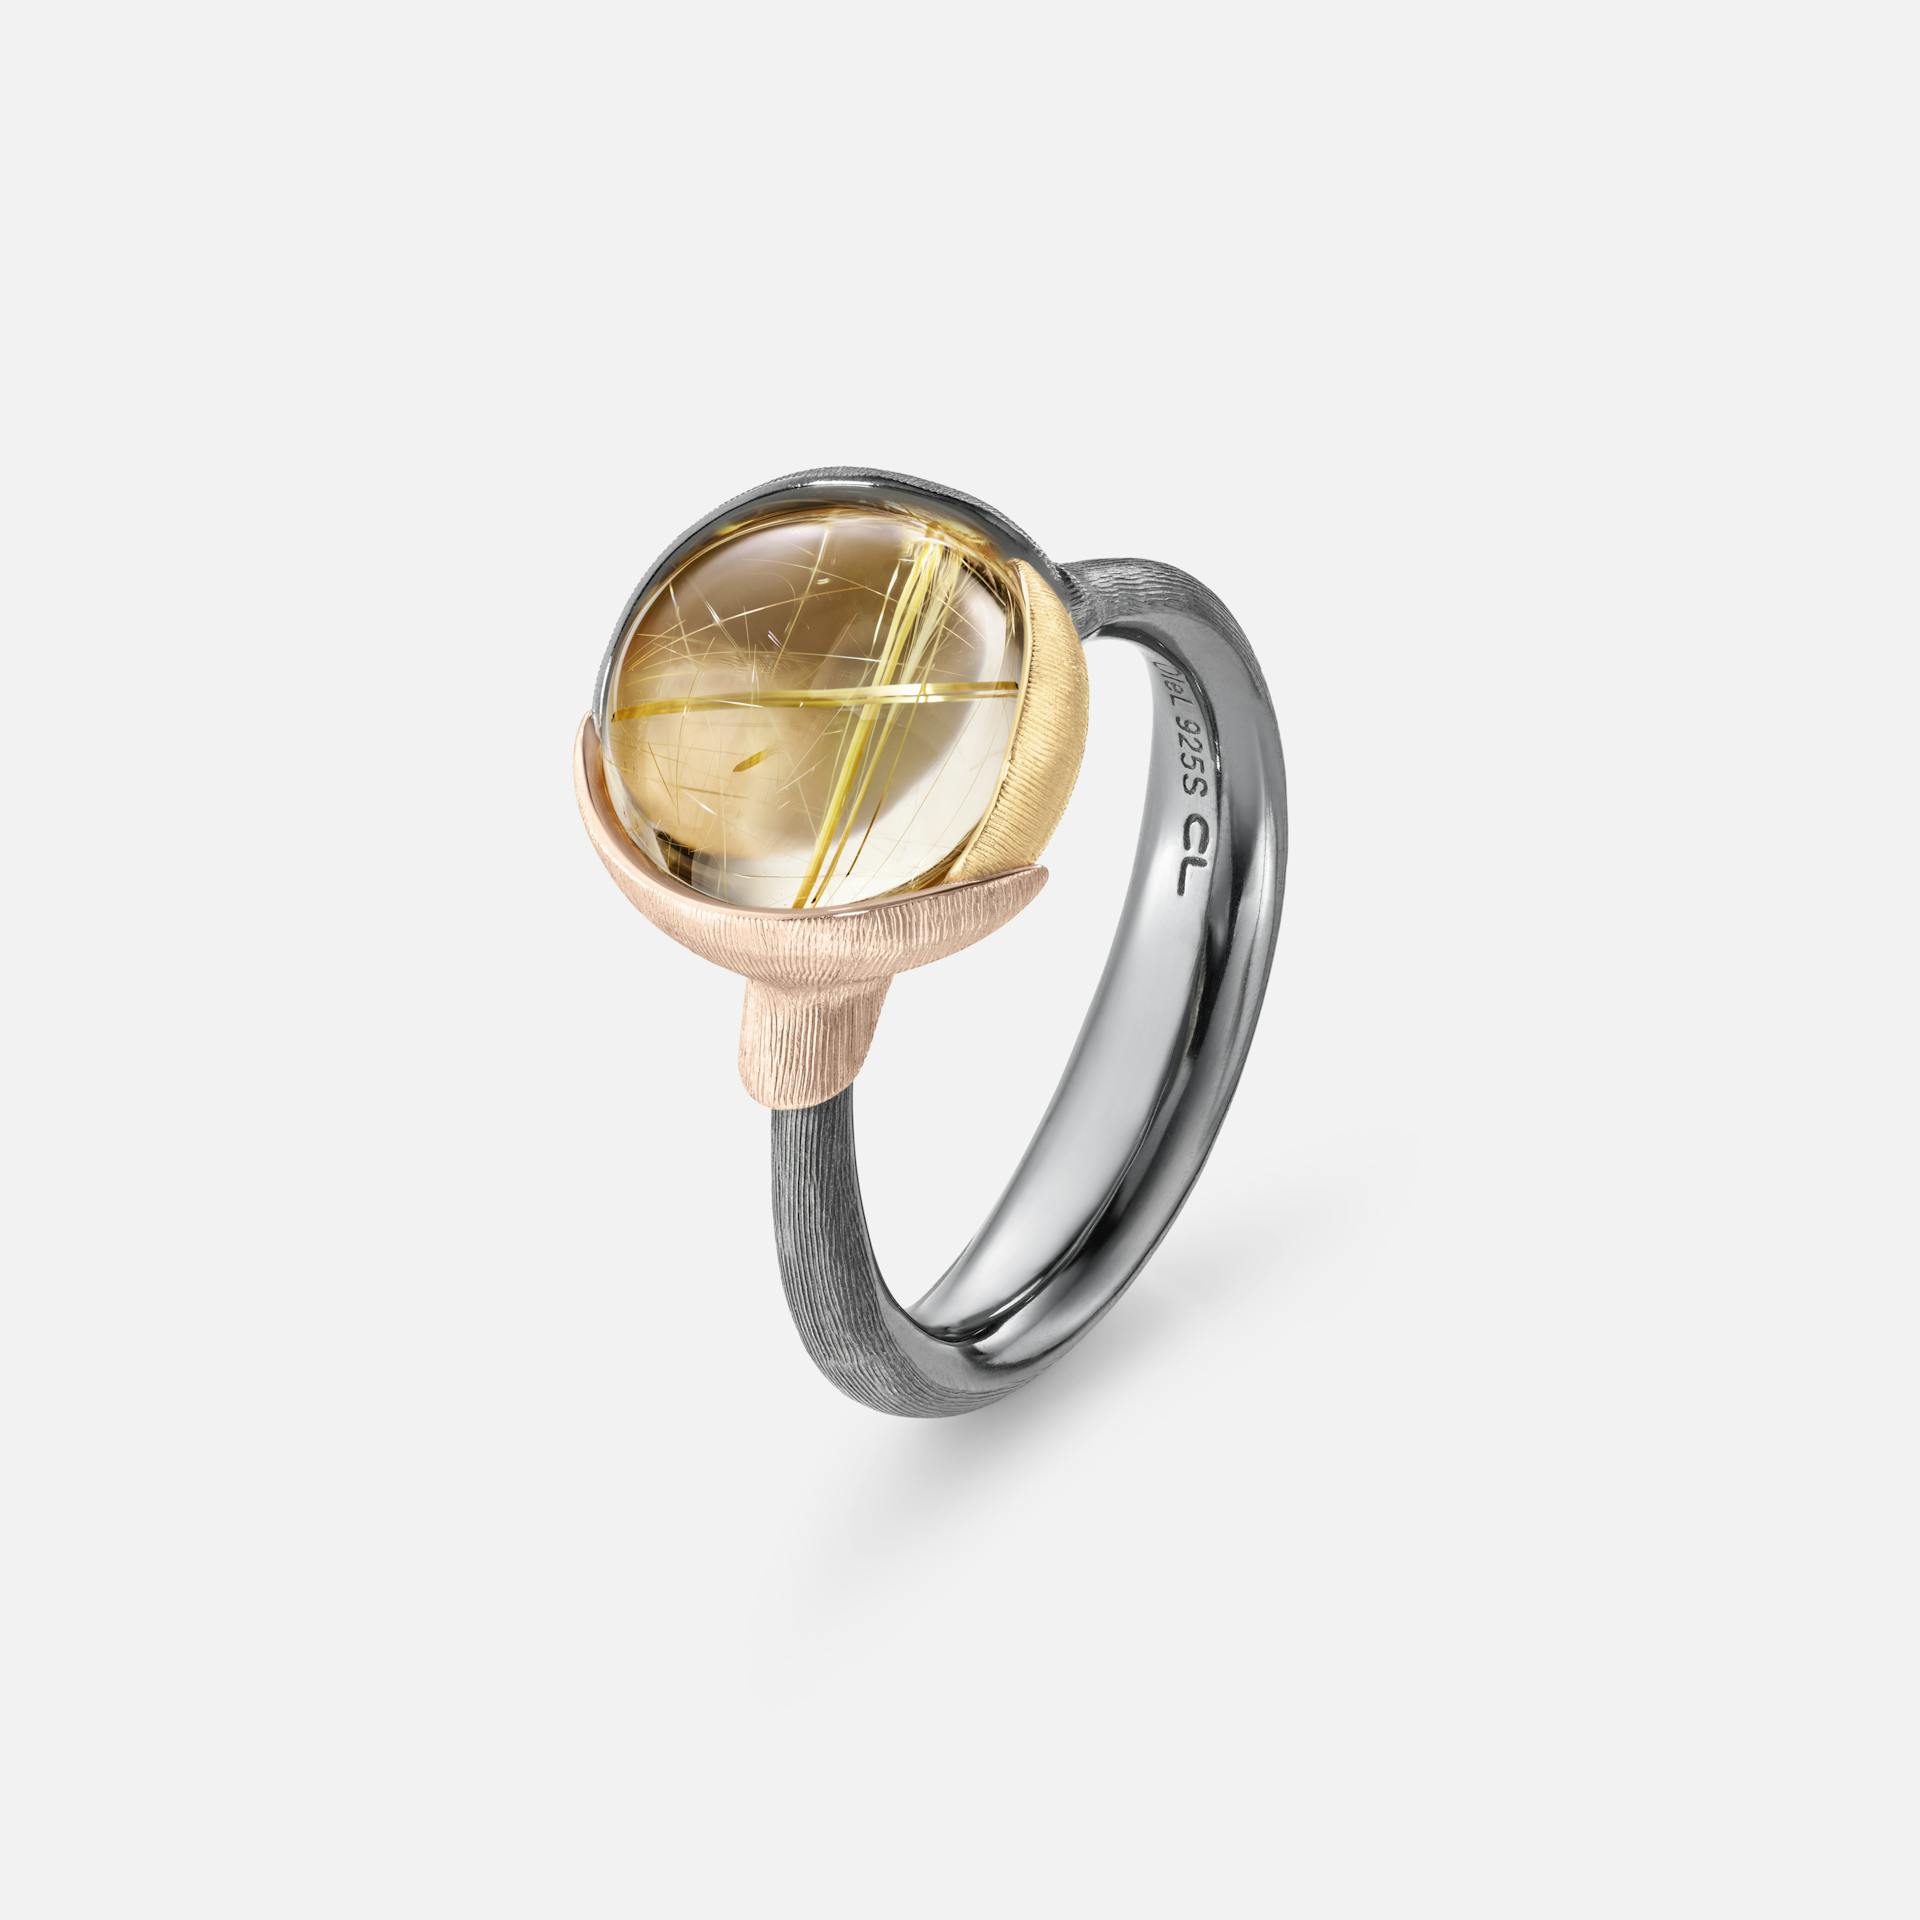 Lotus Ring size 2 in Gold & Oxidized Sterling Silver with Rutile Quartz  |  Ole Lynggaard Copenhagen